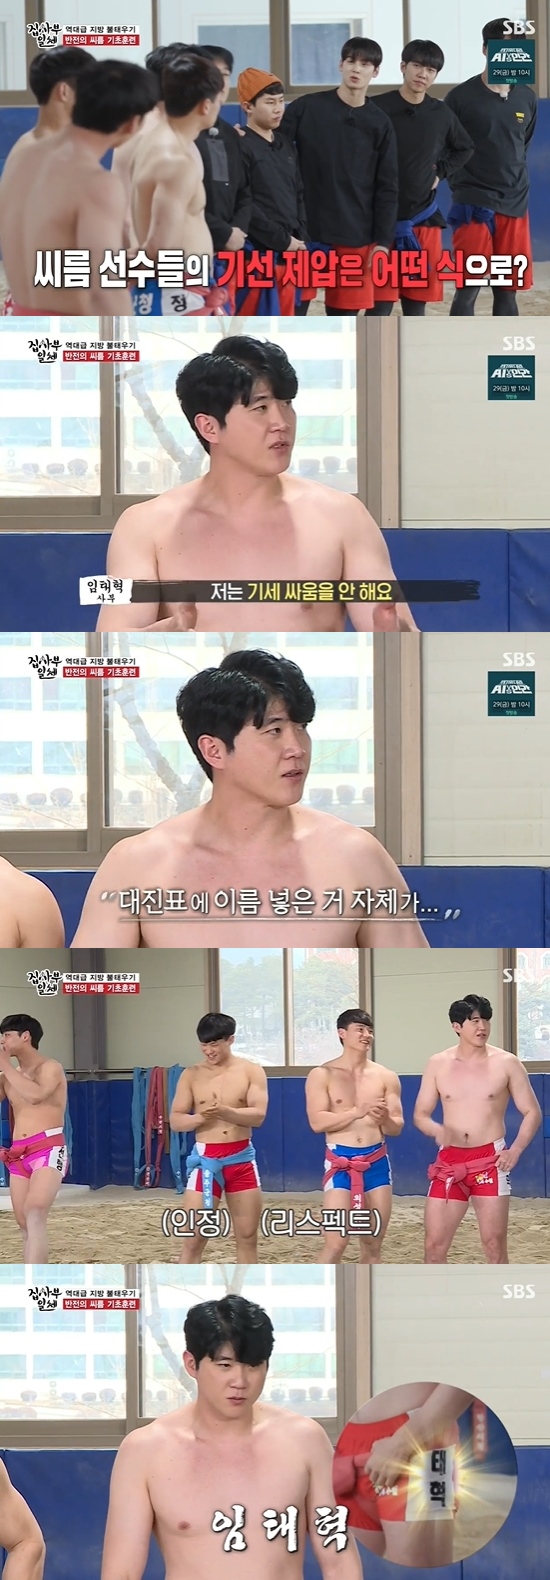 In SBS All The Butlers broadcast on the 24th, wrestler im tae-hyuk, Nobumsu, Night if, and heo Seon-haeng showed the members a basic training demonstration.I will do everything I can to catch my scour in a minute, heo Seon-haeng said confidently.When Yang Se-hyeong tried to grab the scourge, heo Seon-haeng defended with his shoulder.Yang Se-hyeong appealed for pain, saying, It seems like a big rock is weighing down.When Cha Eun-woo asked, How do other masters overpower James Kyson? im tae-hyuk said, I do not fight the momentum.I put my name on Team itself. Im tae-hyuk was called the Lightweight Ssireum Emperor in 17 business titles.Night if said, Ive played good deeds. Im a little sensitive at the game. But he said hed play field legs.When Shin Seong-rok asked, Is that unsincere, heo Seon-haeng said, Its just honest - I do if I do.Night if said, There is only a field bridge that can be done./ Photo = SBS broadcast screen